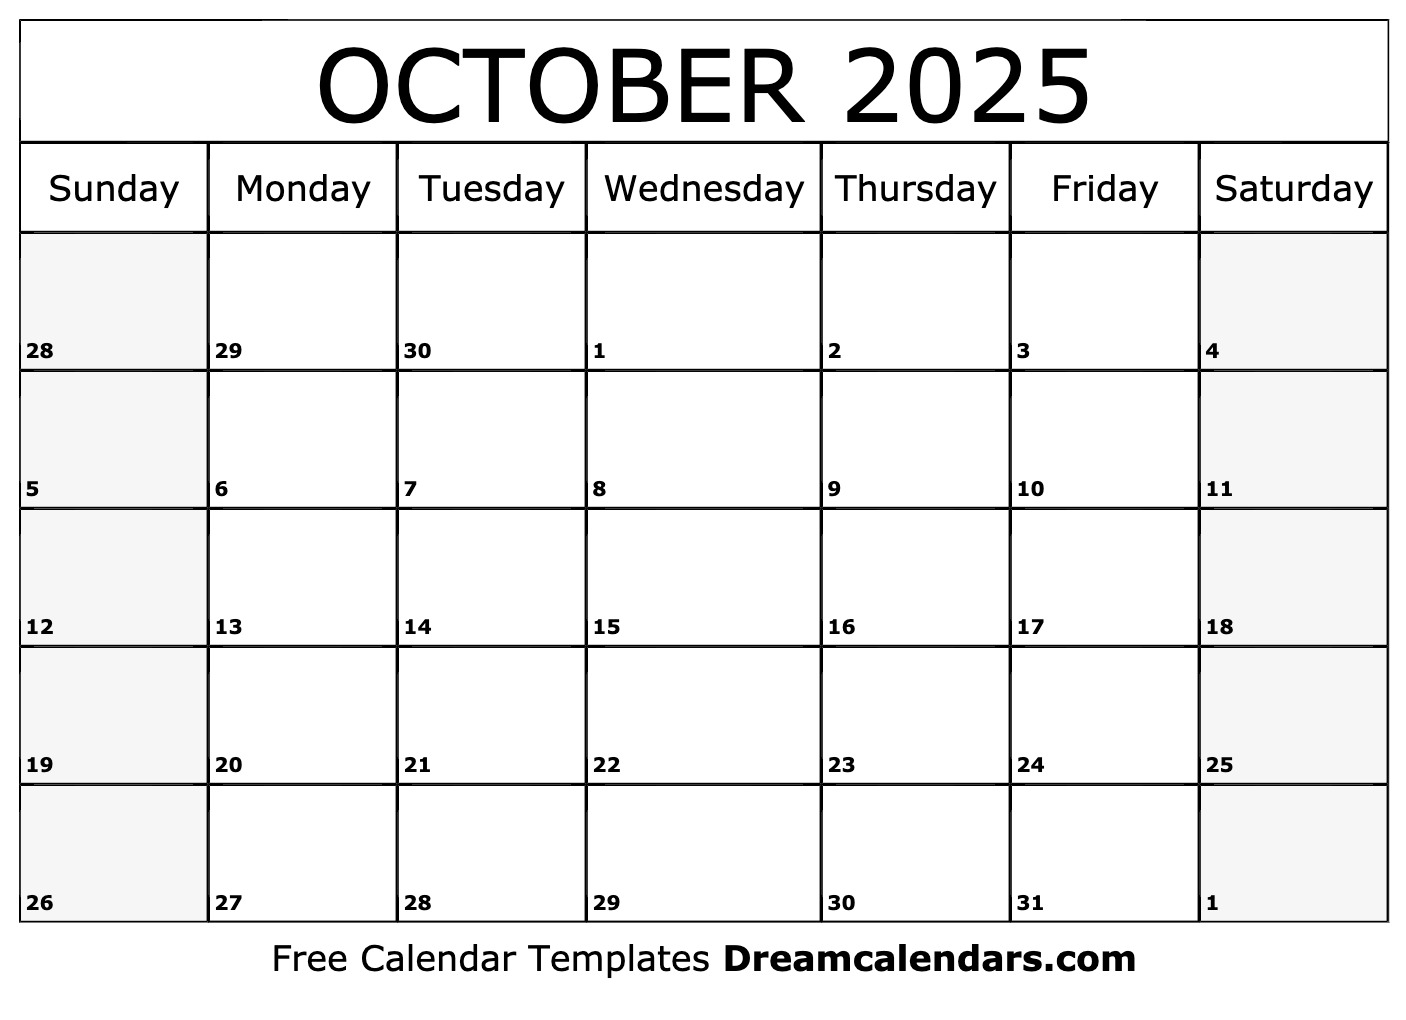 october-2025-calendar-with-day-numbers-wikidates